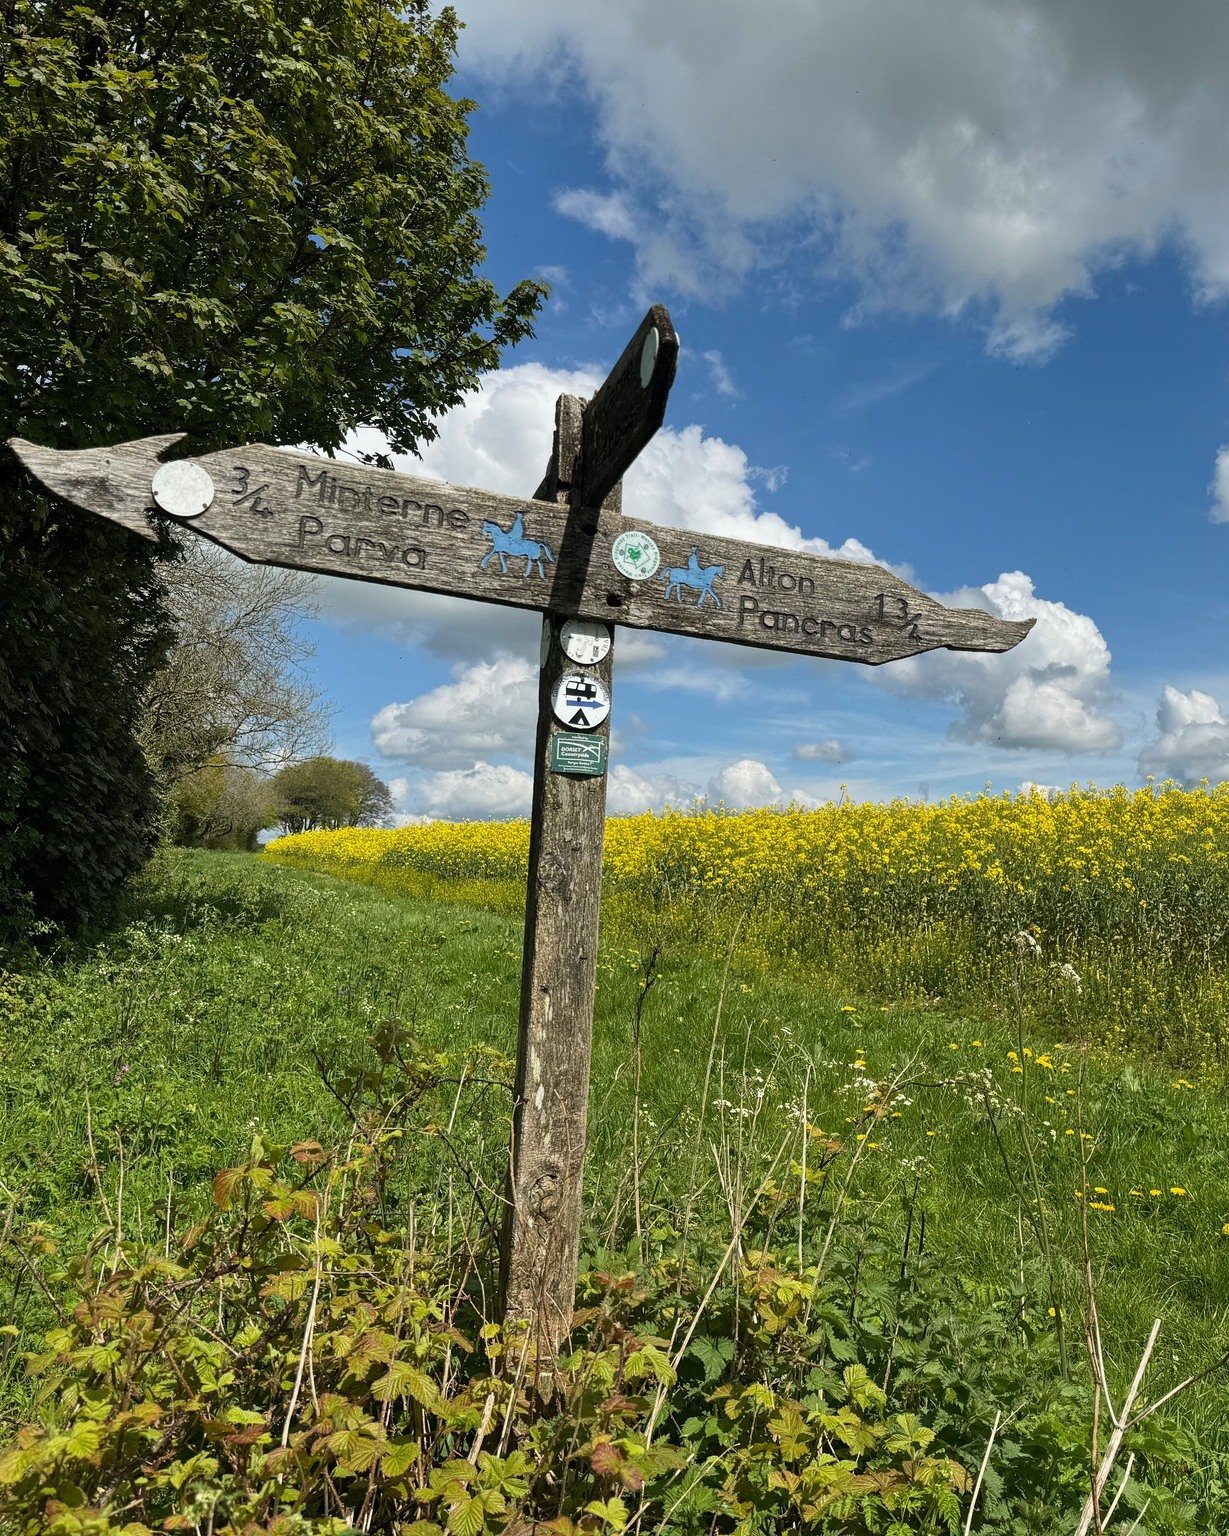 Lace up your boots for Dorchester Walking Festival 🥾🥾 Here at Came Down, we are so lucky to be surrounded by breath-taking rural landscapes and plenty of scenic walking routes. 

As a golfer, you may also be a keen walker. Whether you like a gentle